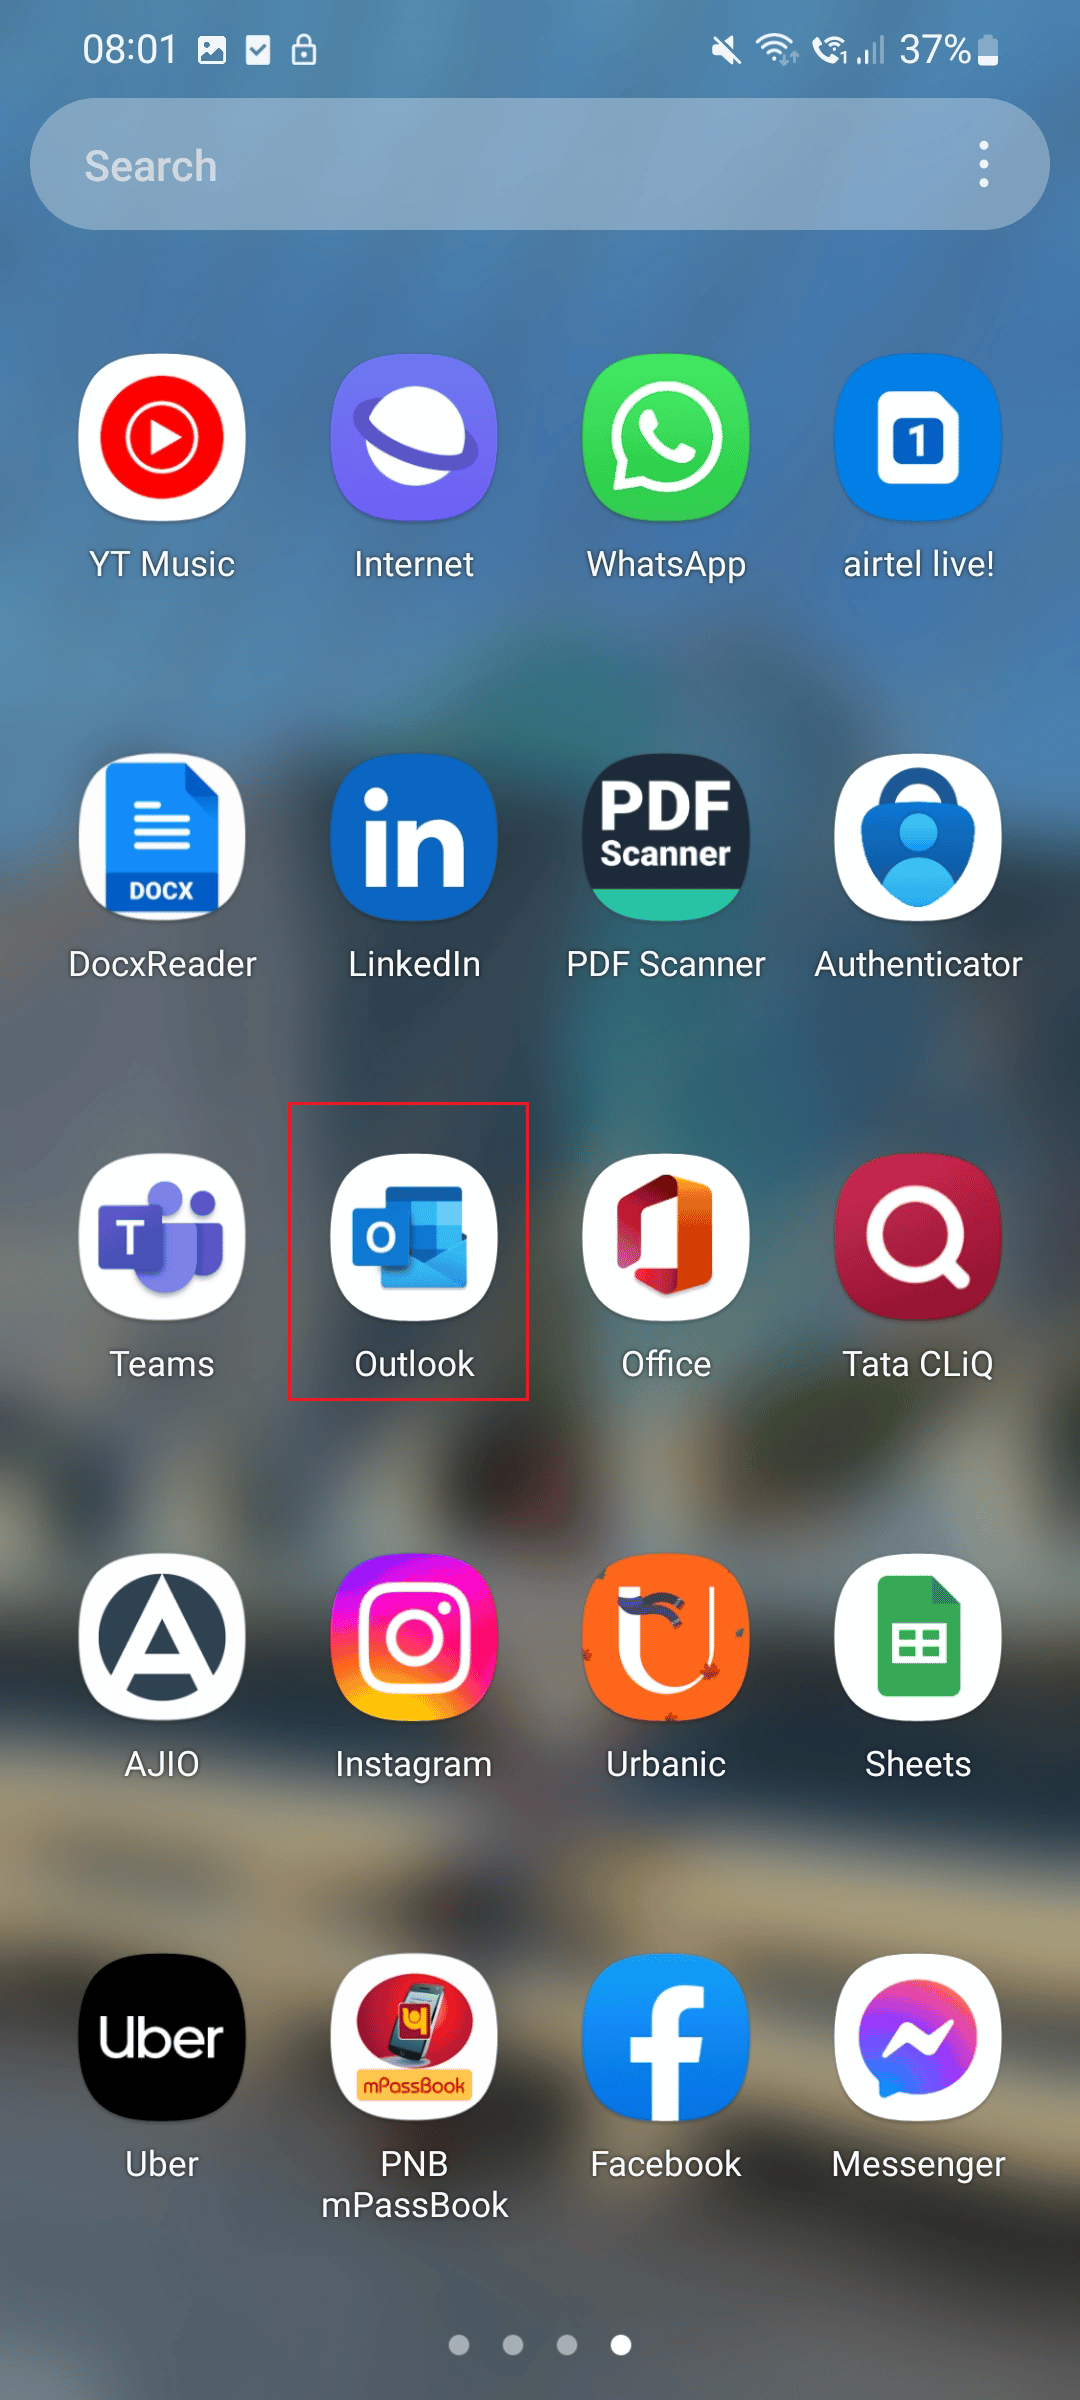 tap on the Outlook app